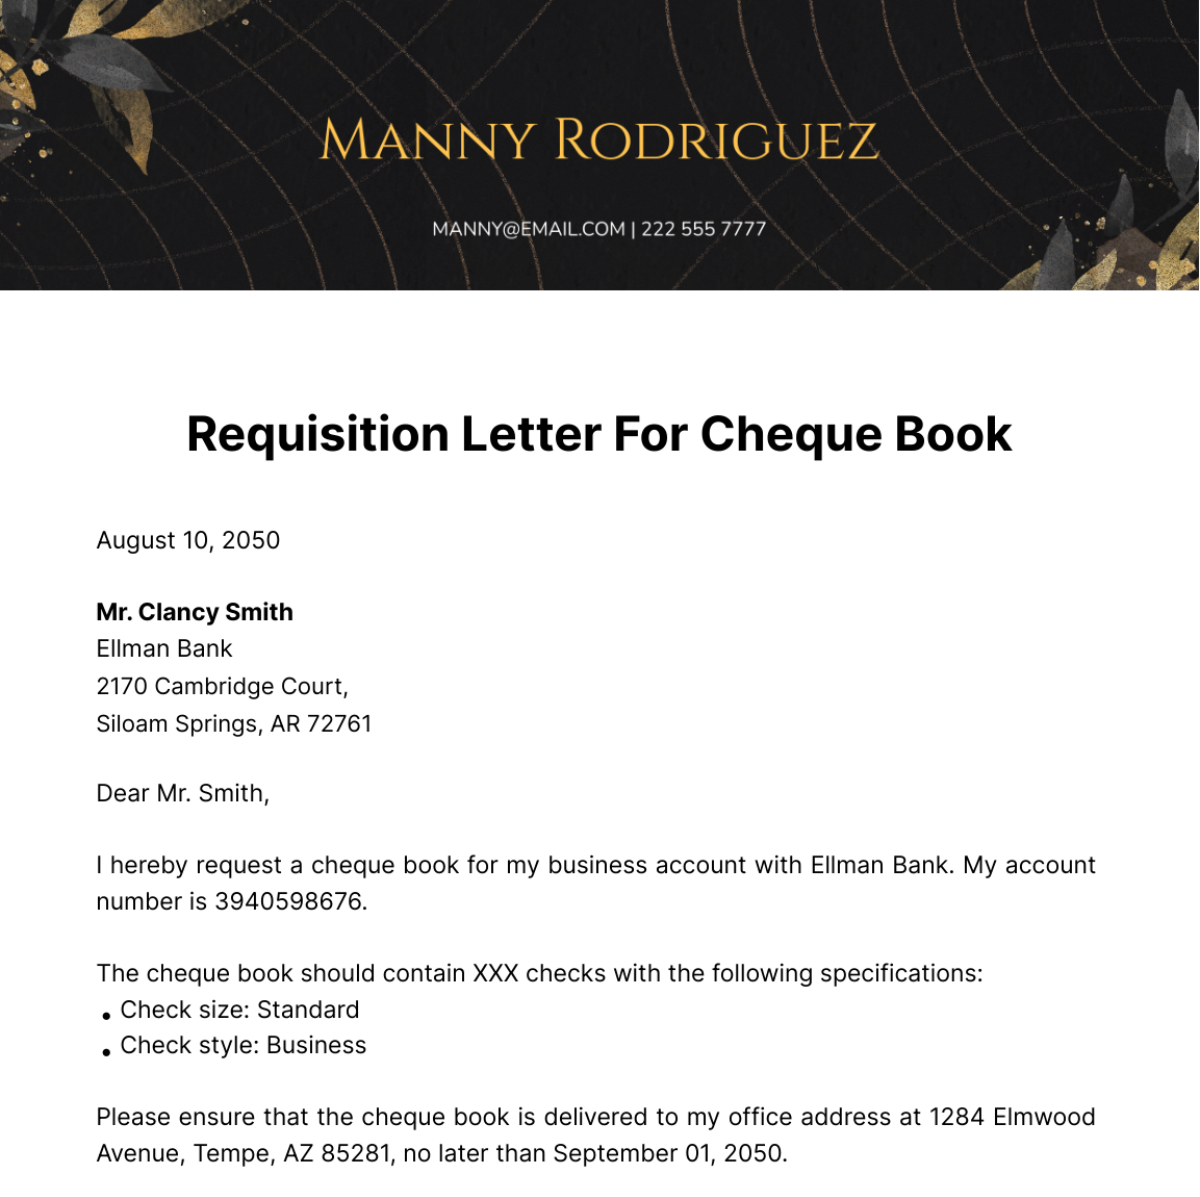 Requisition Letter for Cheque Book Template